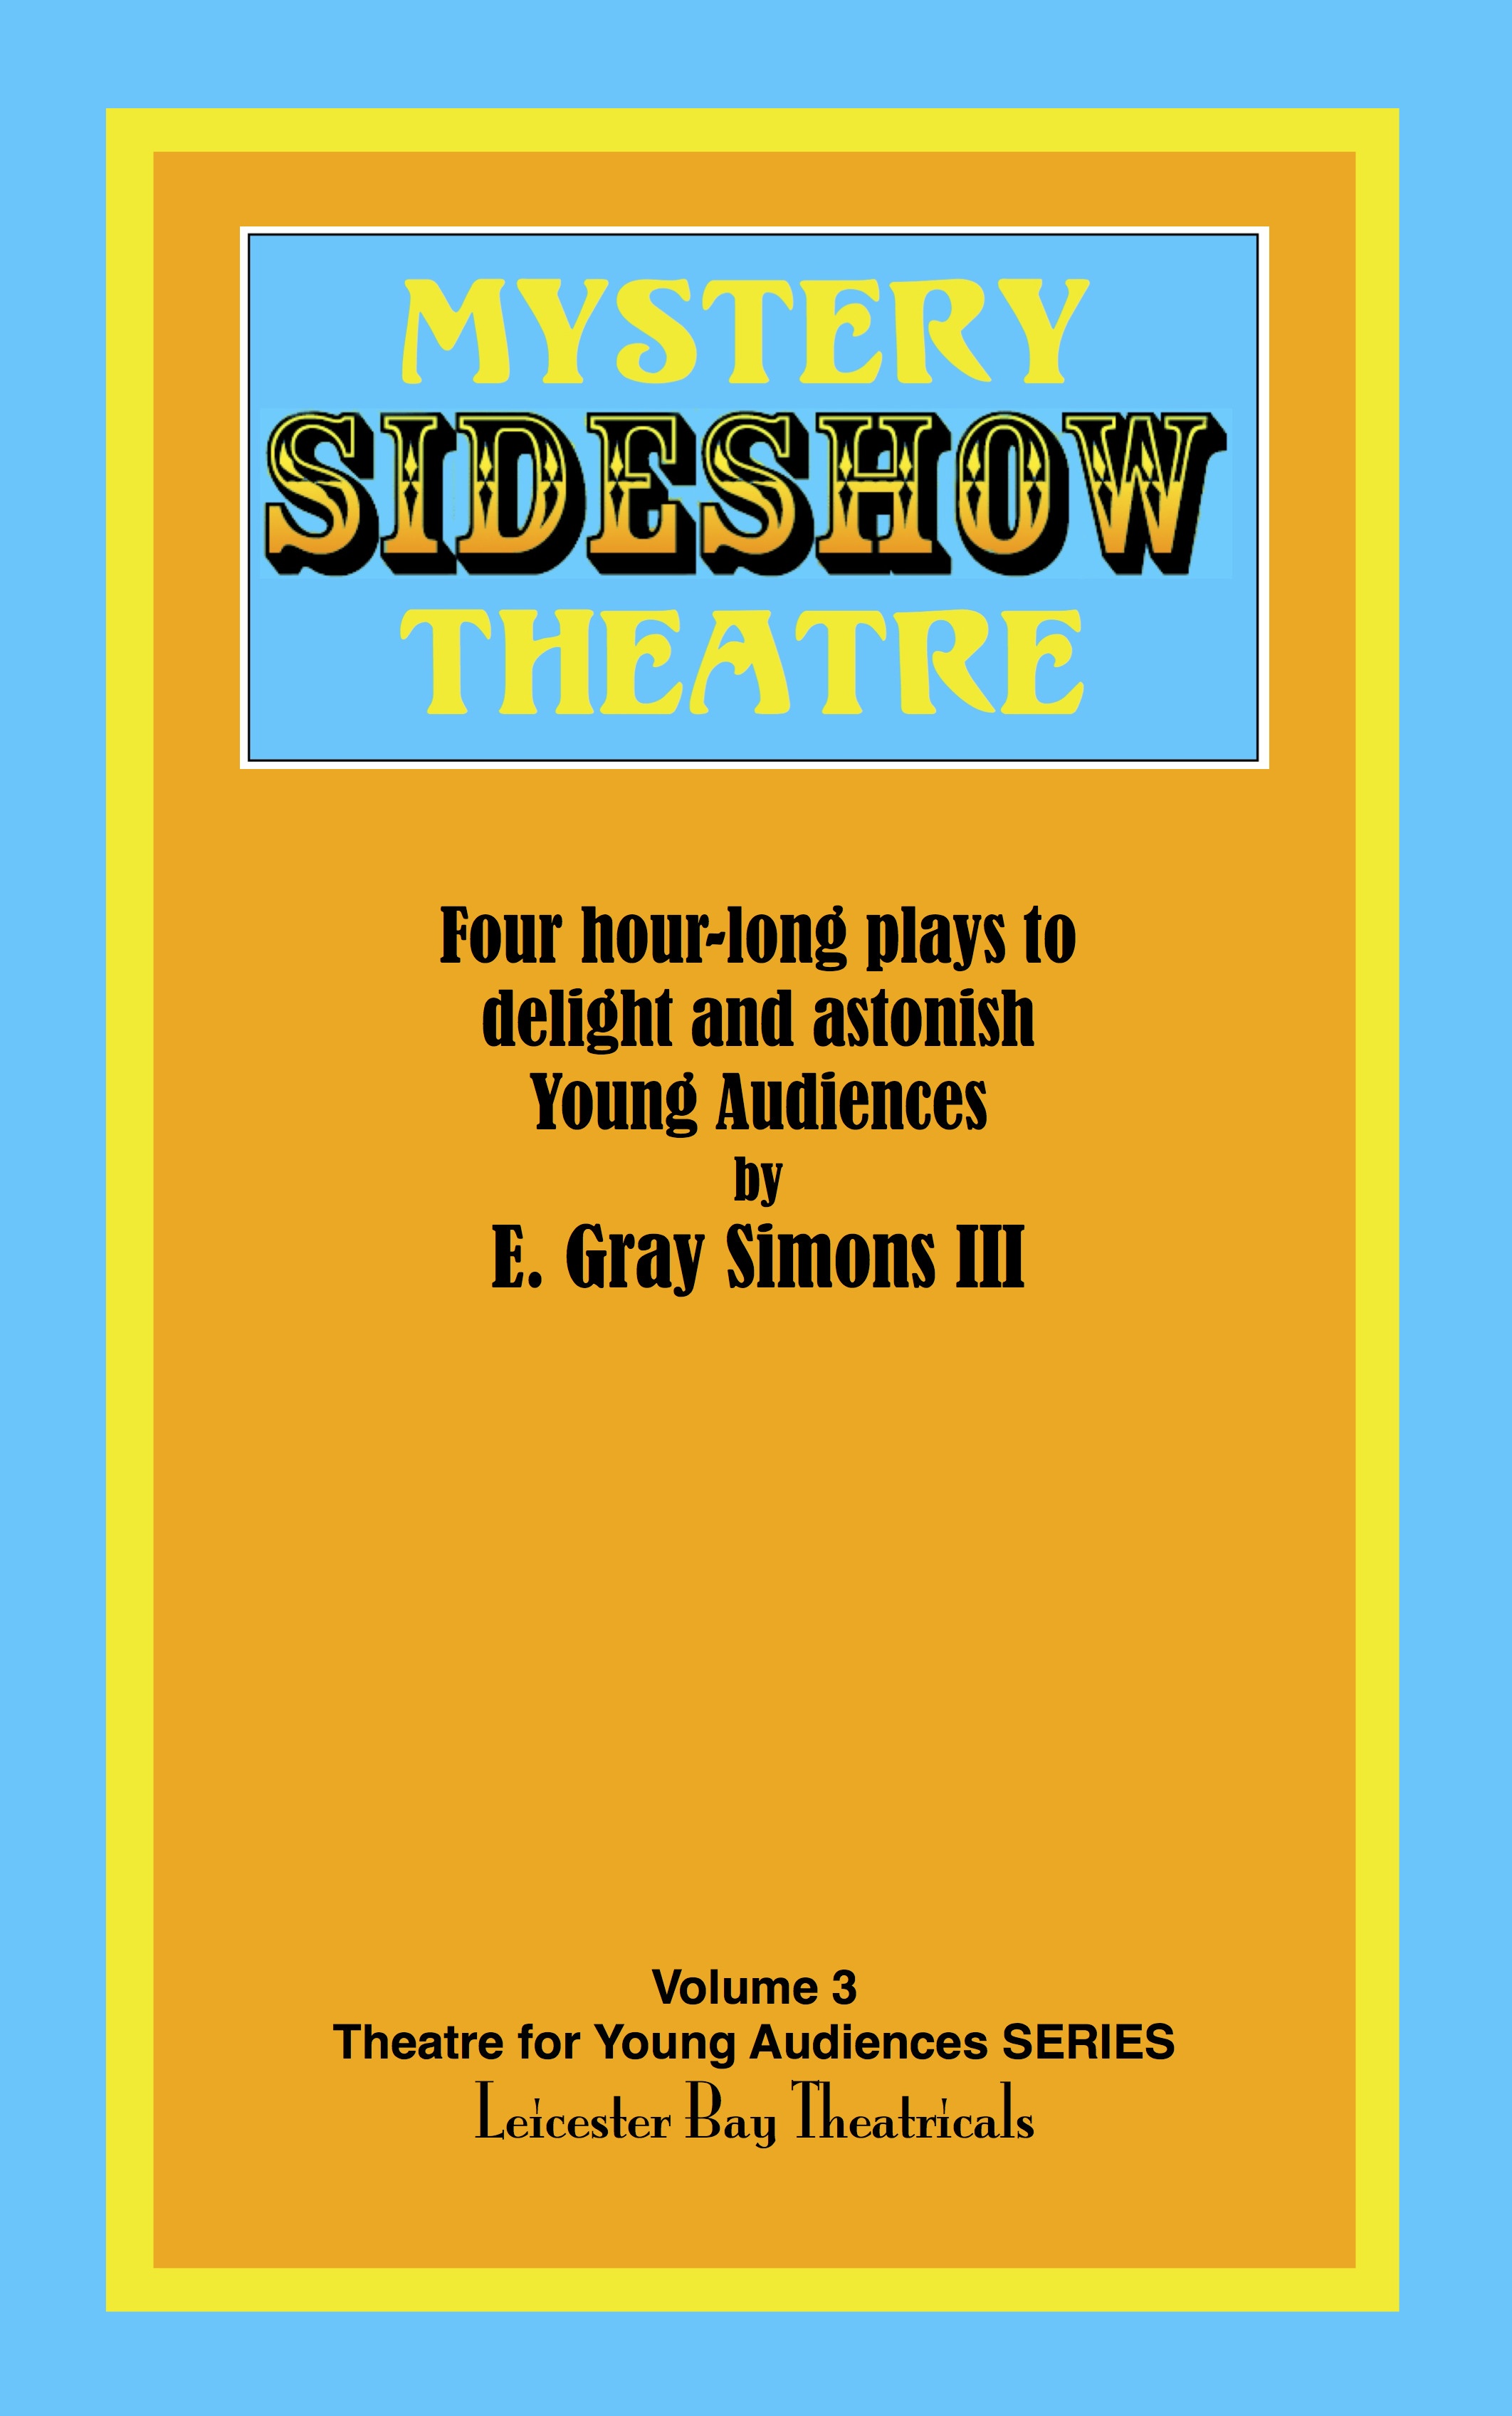 Mystery Sideshow Theatre – Volume 3 Plays for Young Audiences Series